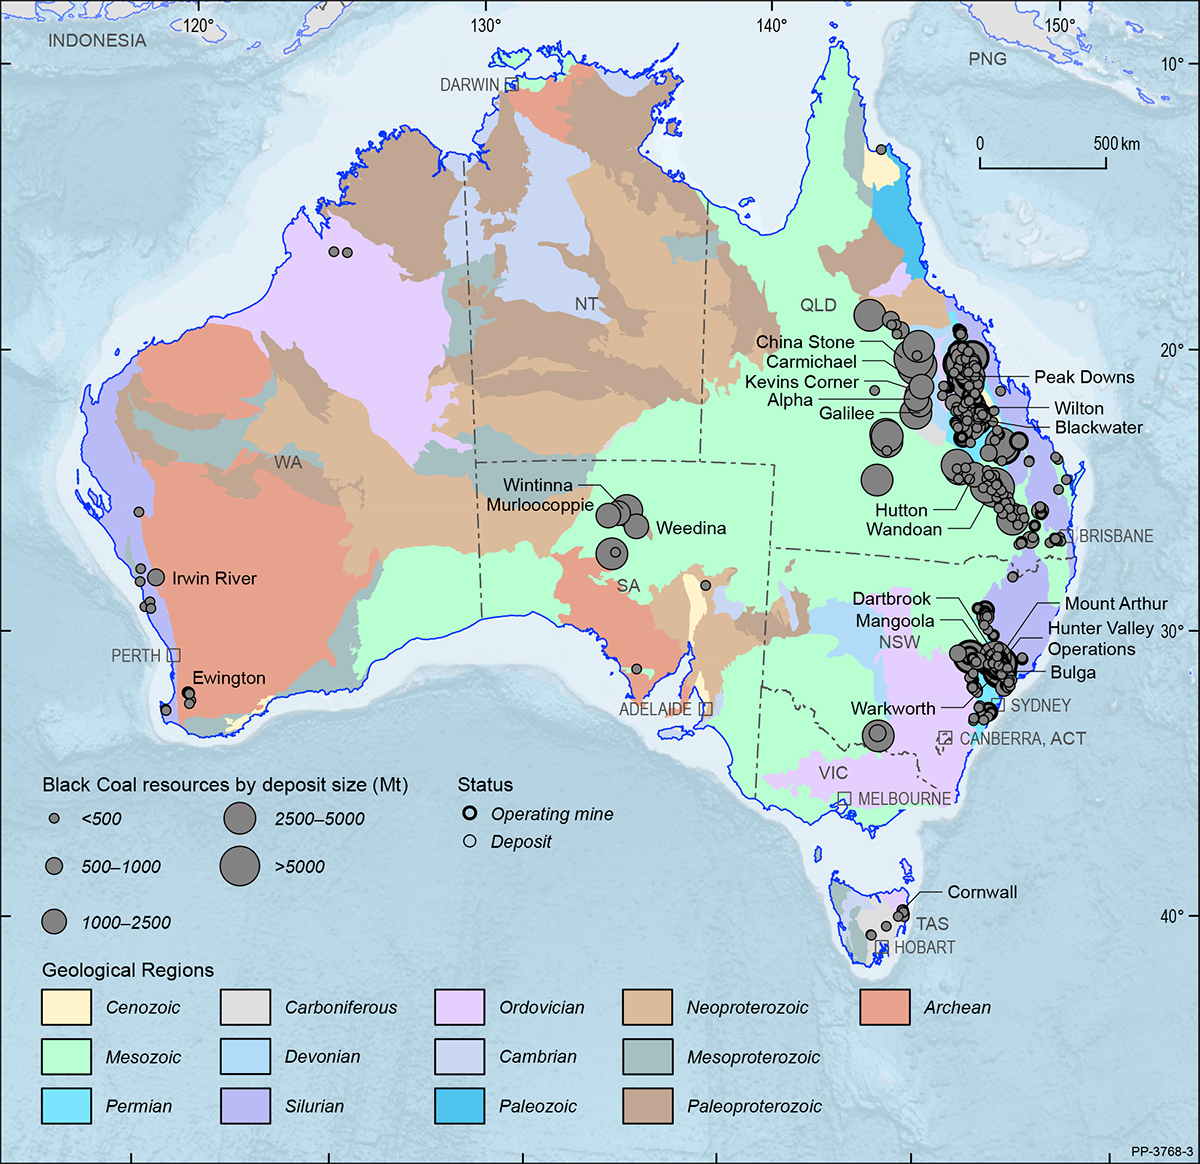 A map showing the Australian continent shaded by the ages of the main geological provinces highlighting the geographical distribution of Australian black coal deposits and operating mines 2019.